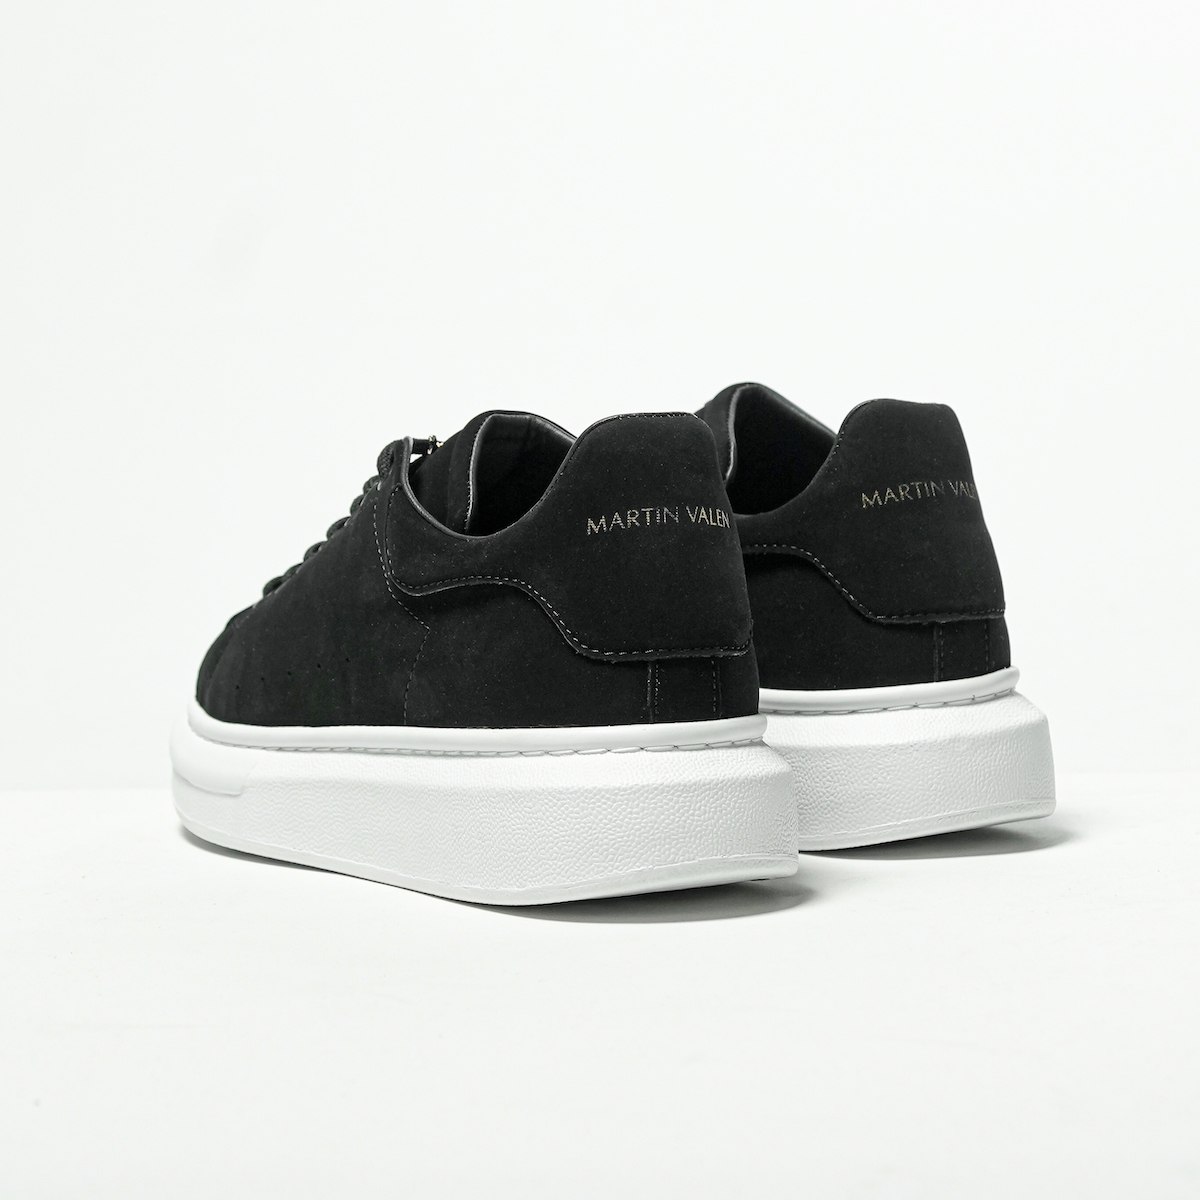 Men’s Chunky Suede Sneakers in Black and White with Crown | Martin Valen